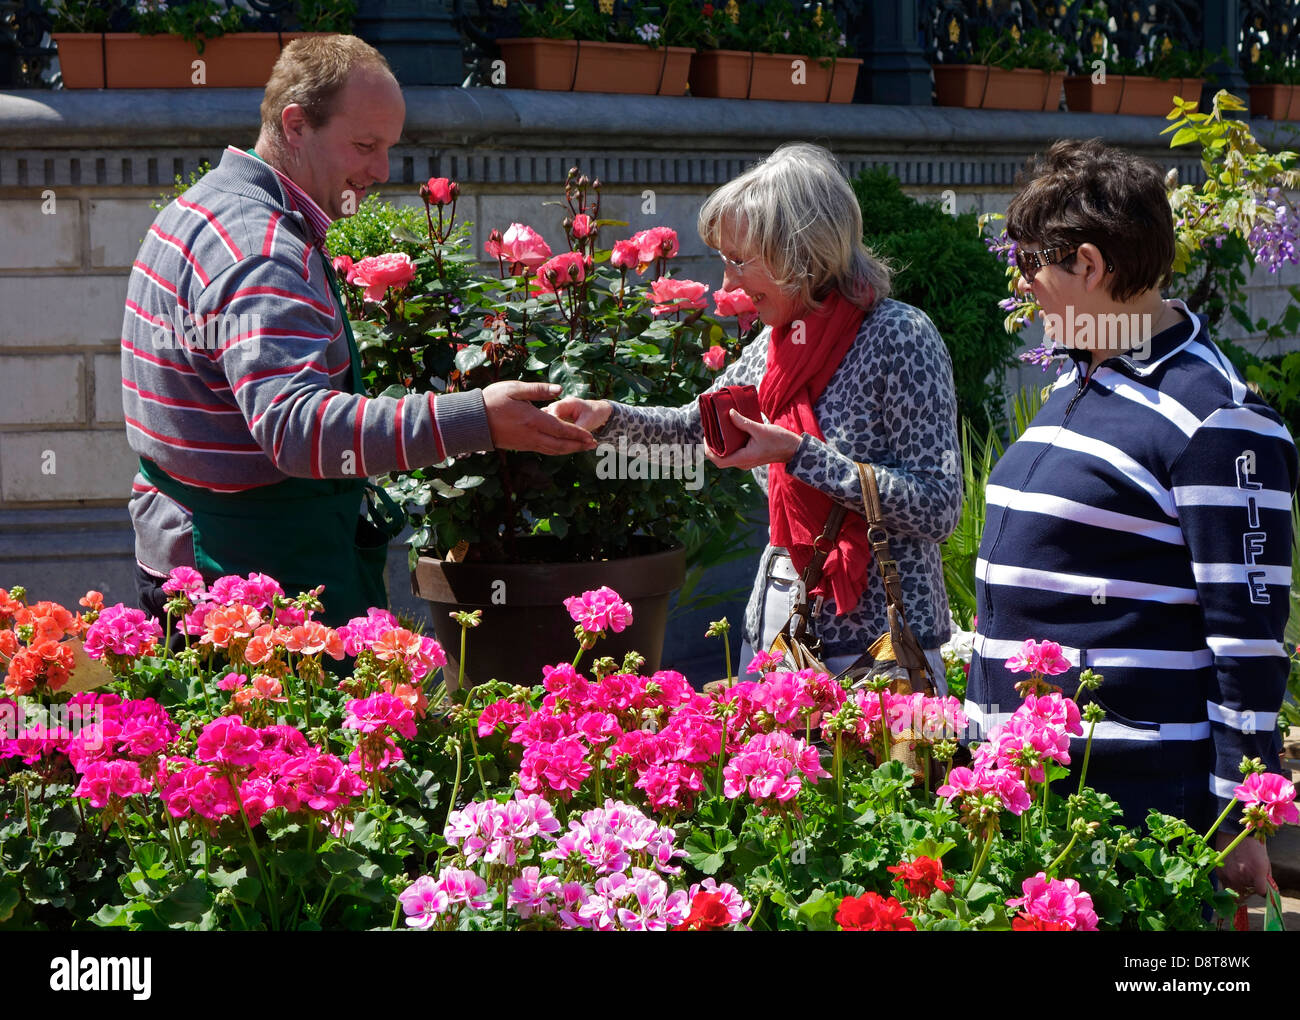 Woman paying stallholder at flower stand for colourful flowers at flower market Stock Photo